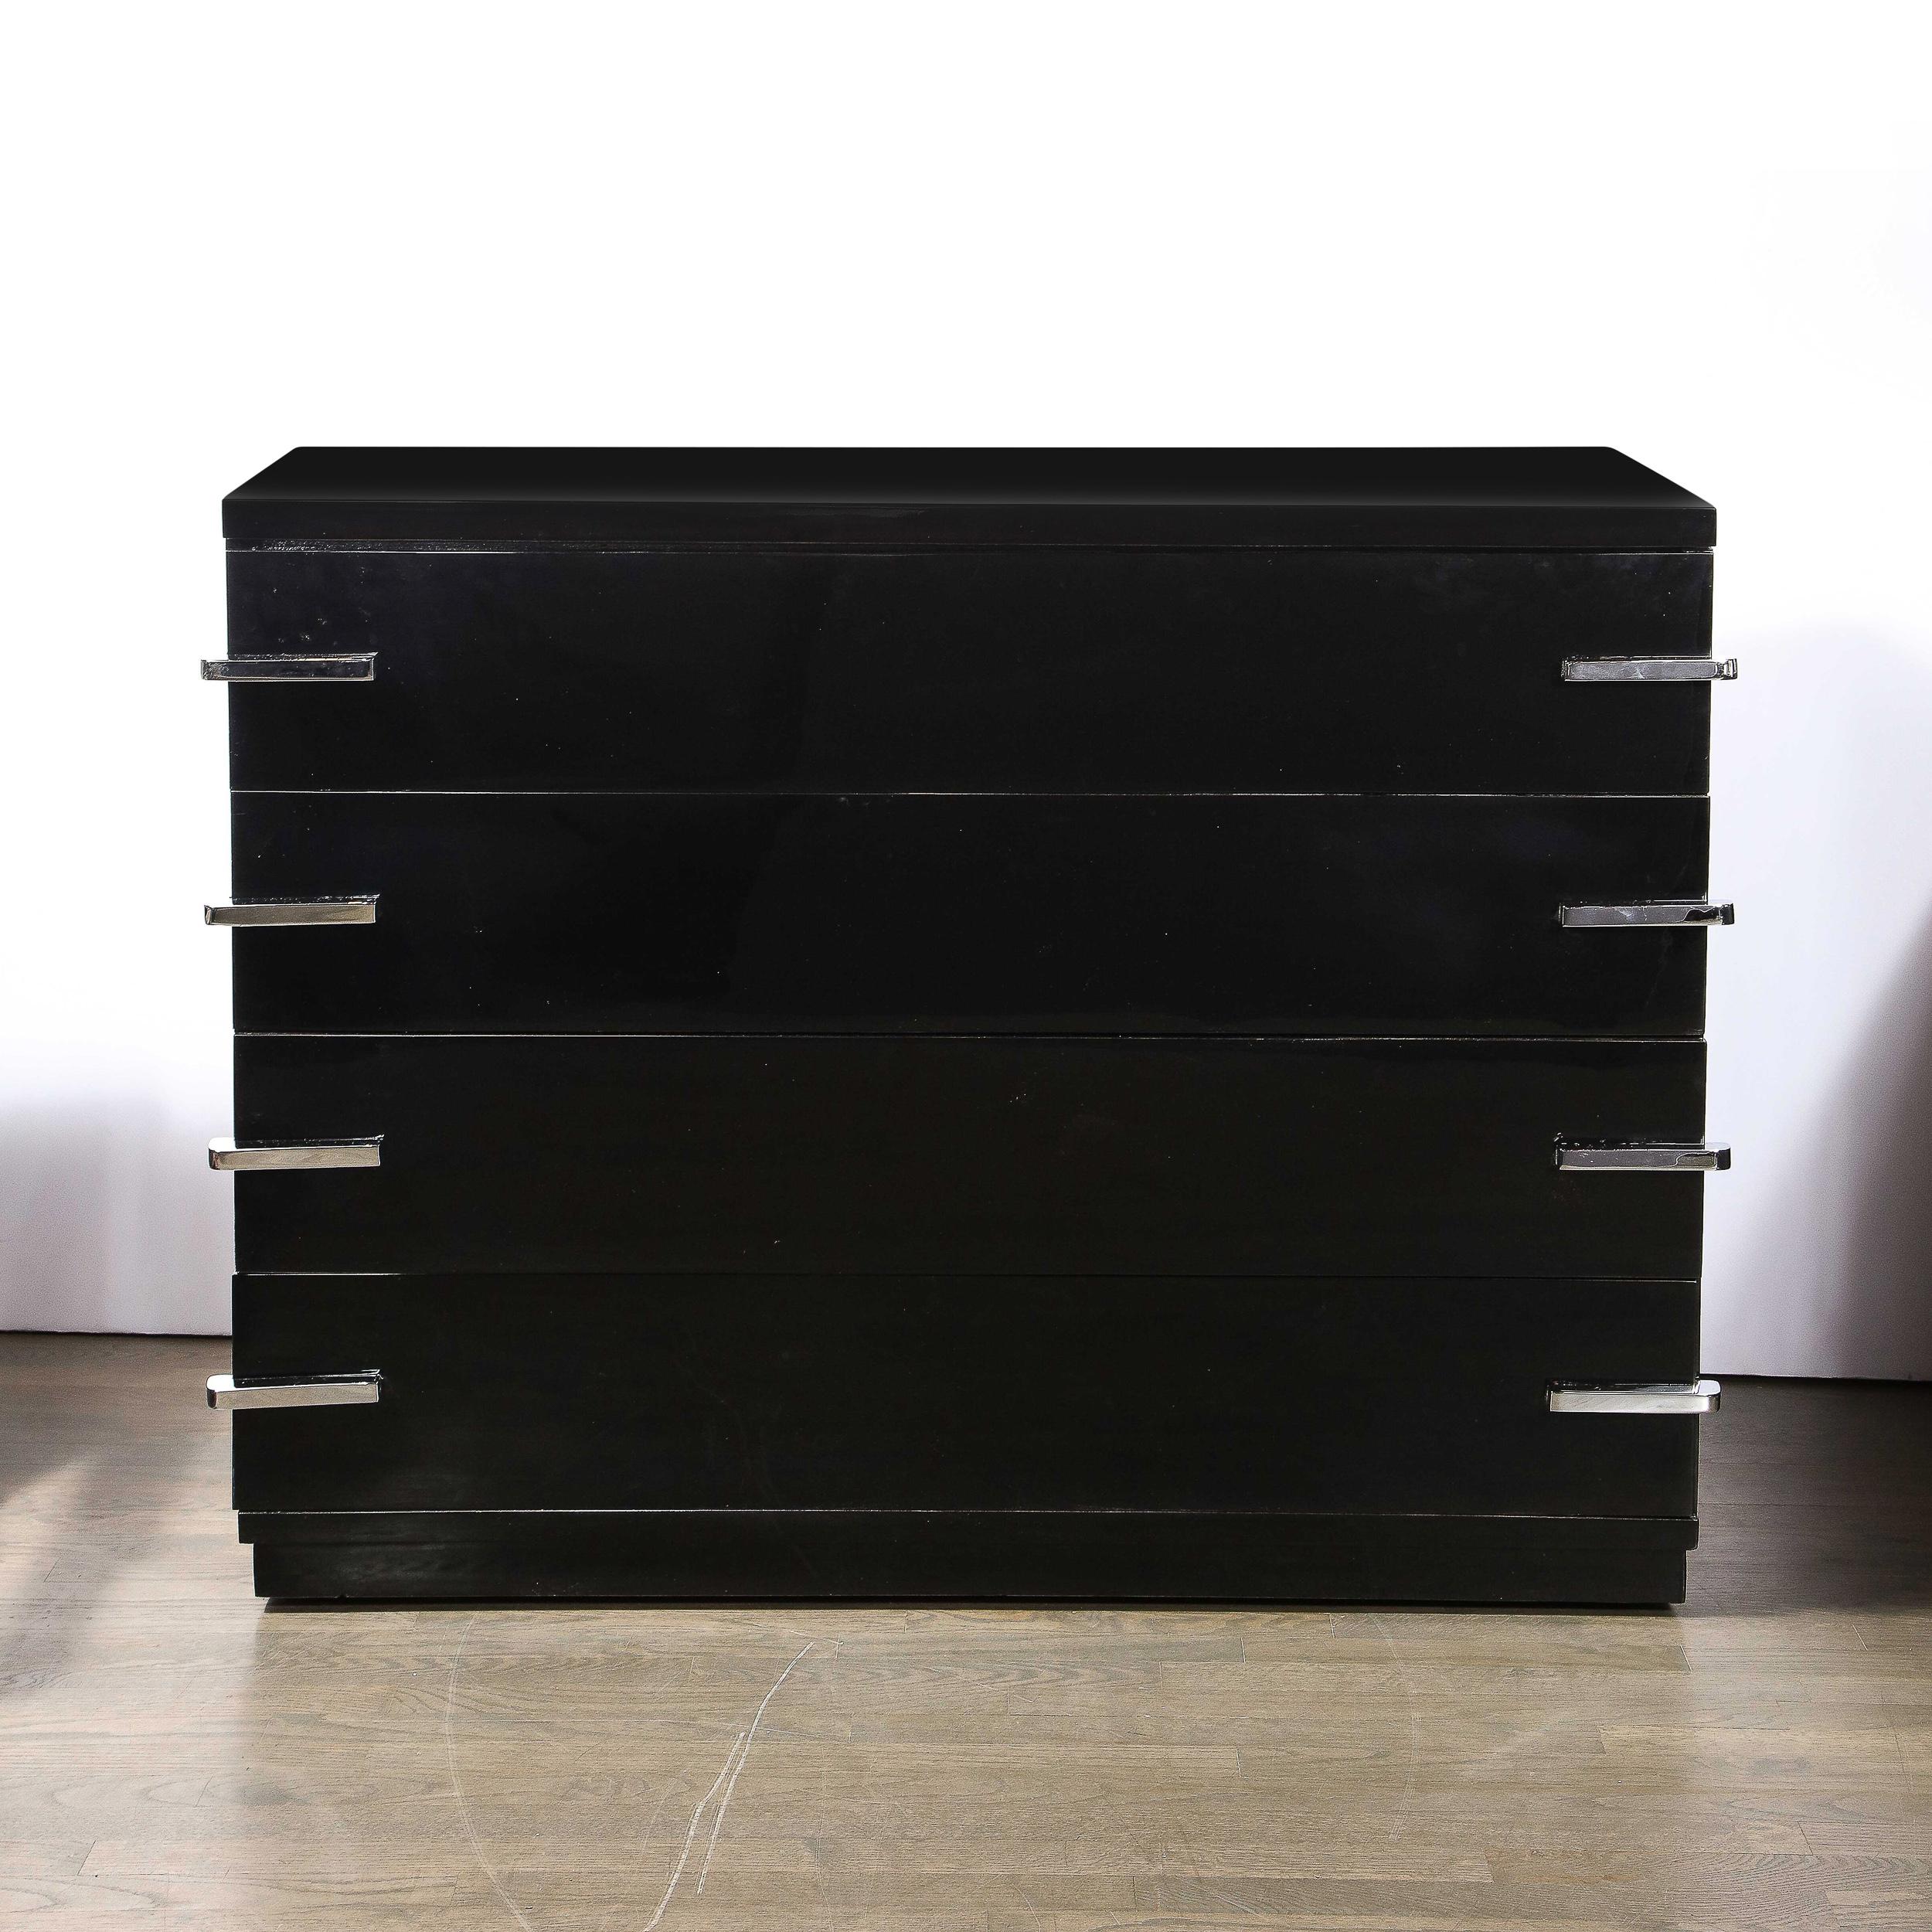 This stunning Art Deco Machine Age black lacquer four drawer wide dresser was realized in the United States, circa 1935. It offers a tiered skyscraper style base and volumetric rectangular body in lustrous black lacquer. Each drawer is fitted with